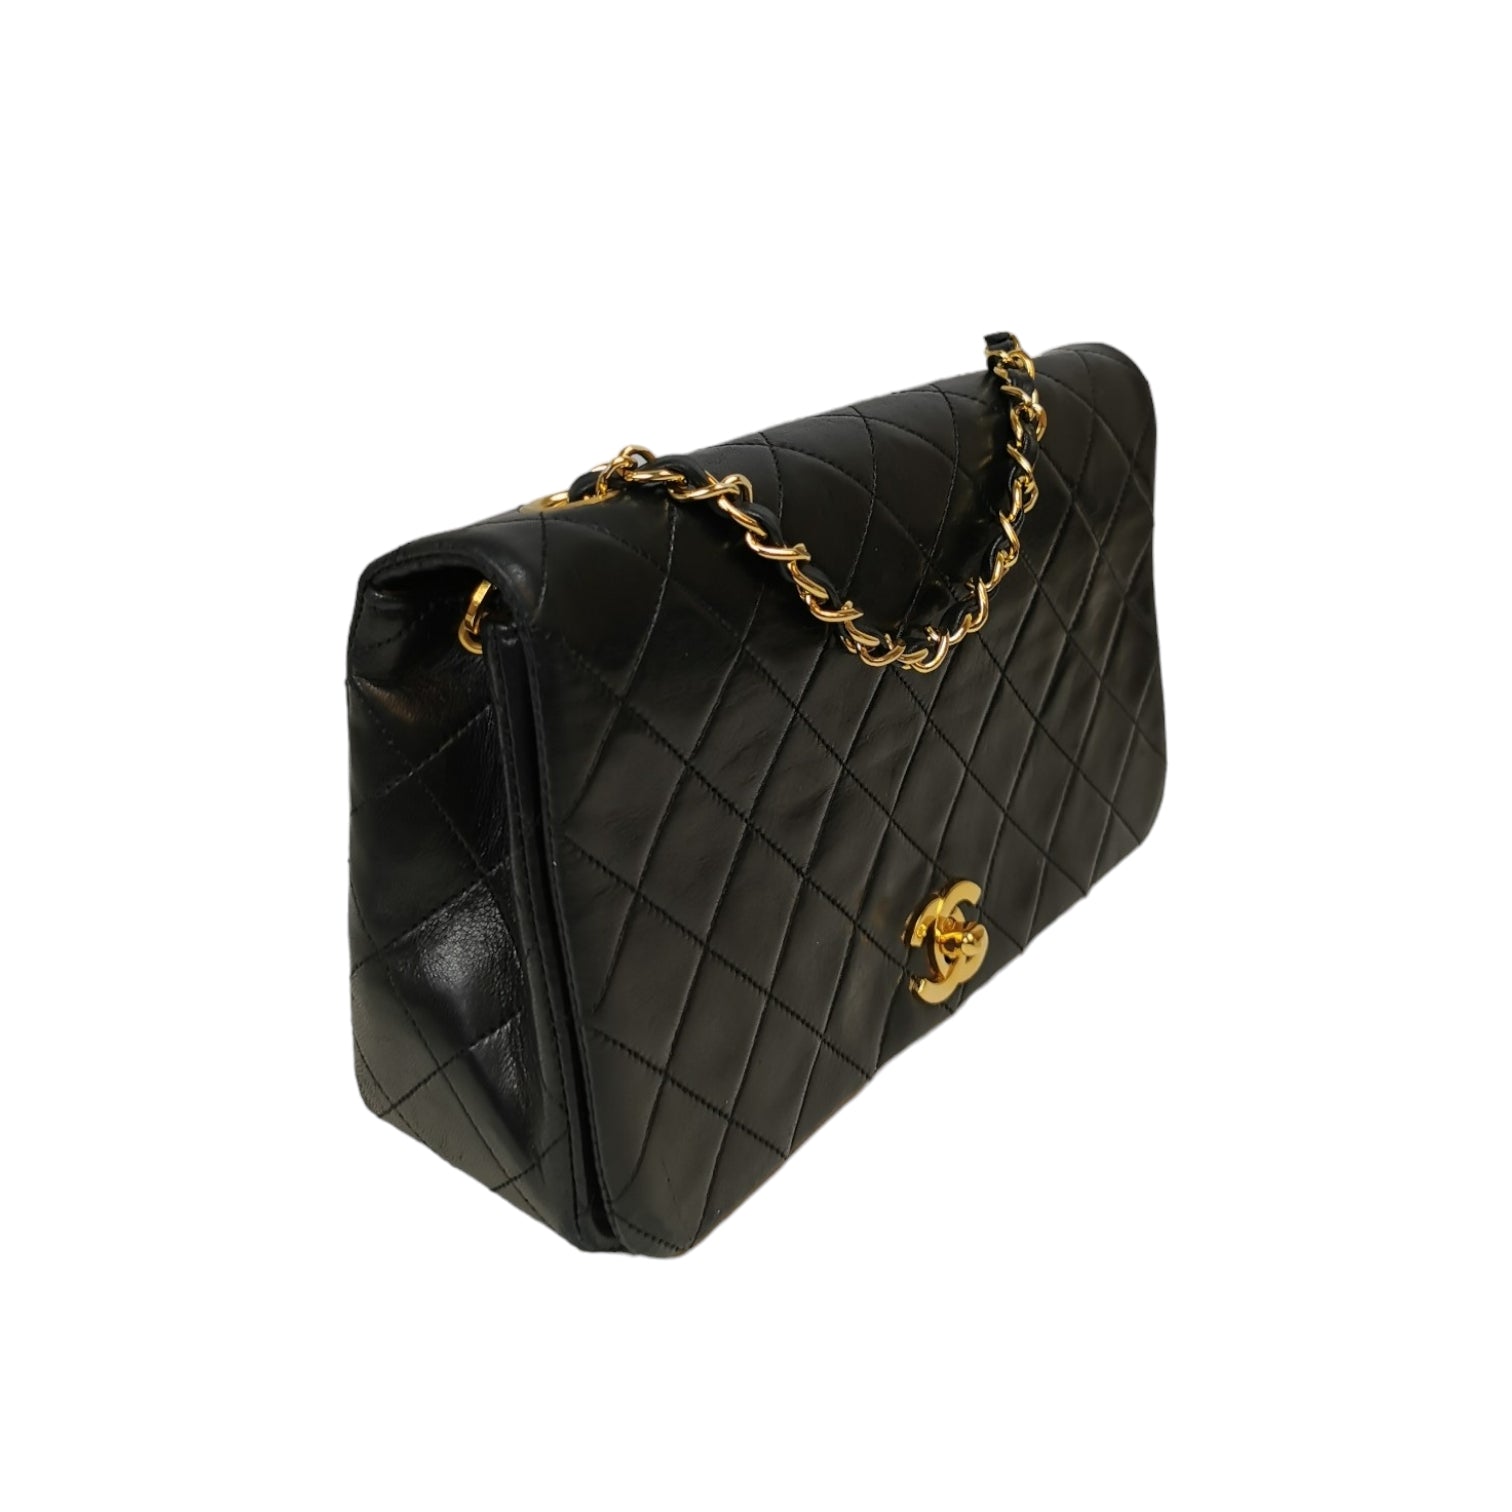 Chanel Gold Quilted Lambskin Square Flap Bag Q6B0271ID9019